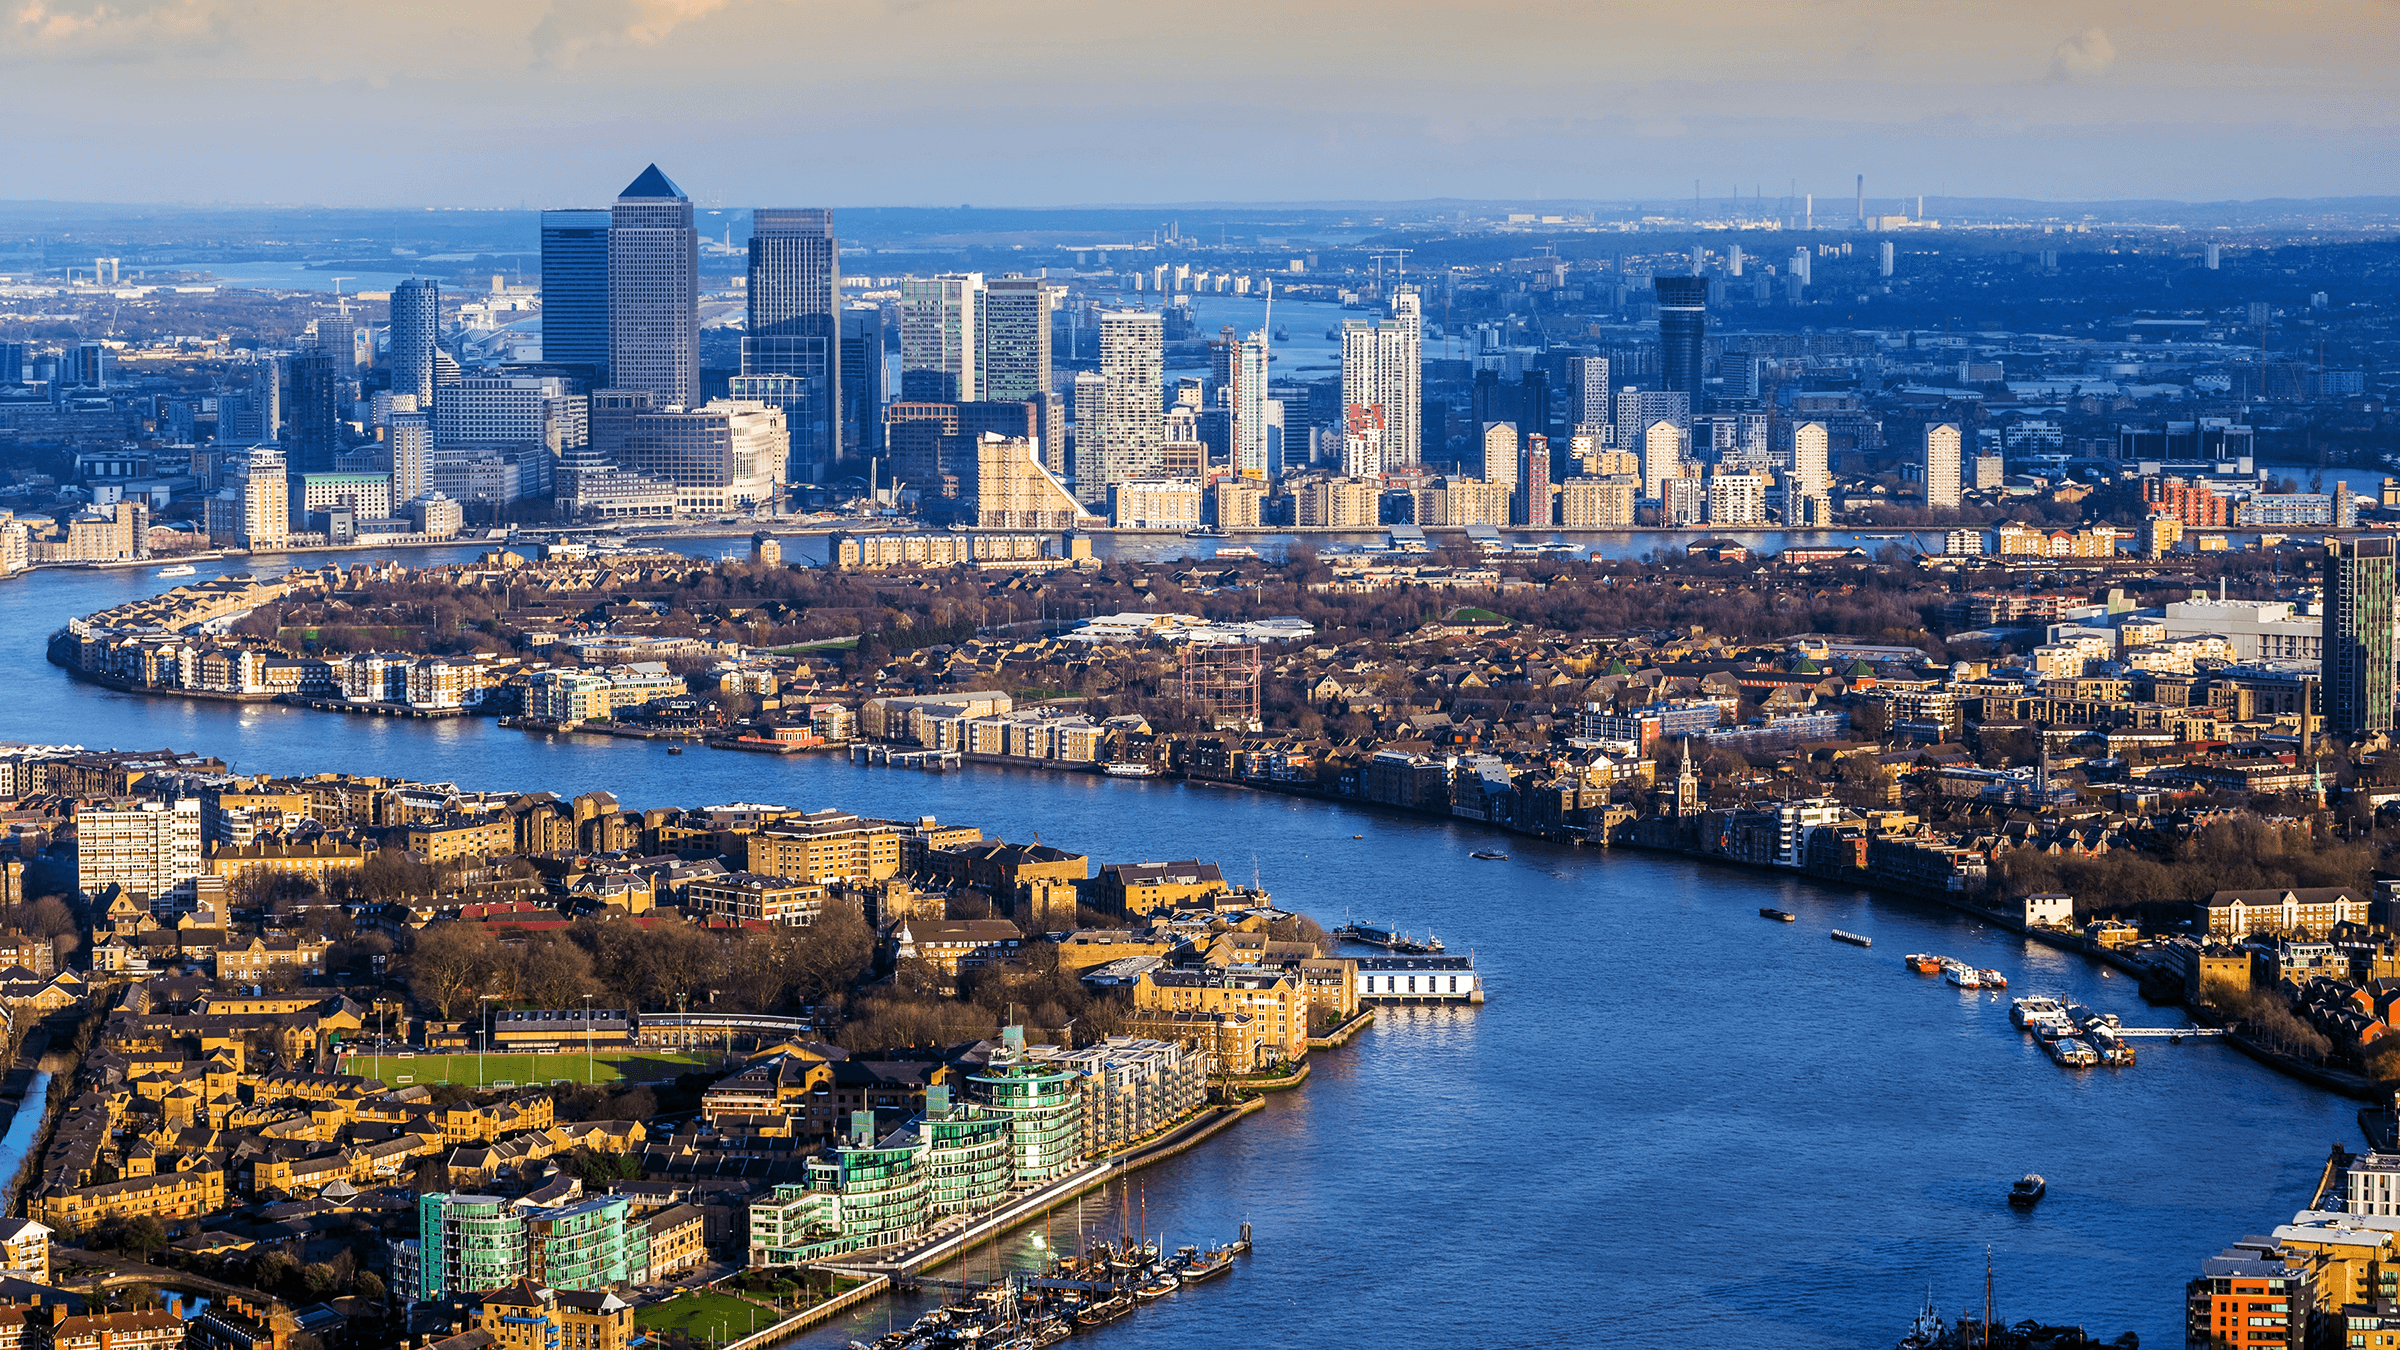 An image of the east end of London featuring Canary Wharf